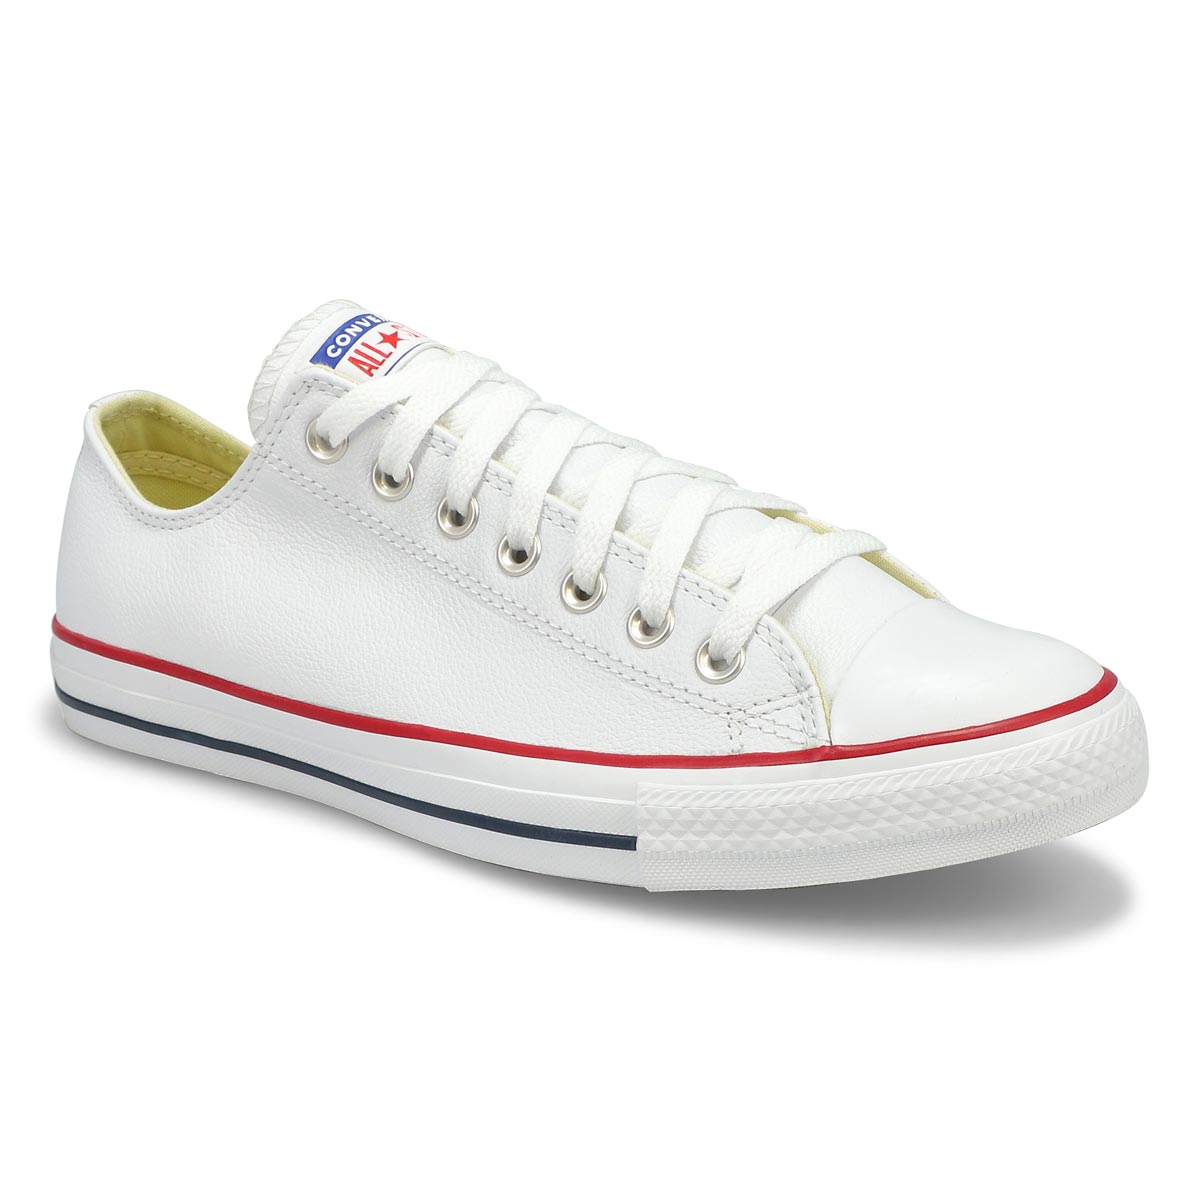 Men's Chuck Taylor All Star Leather Sneaker -White